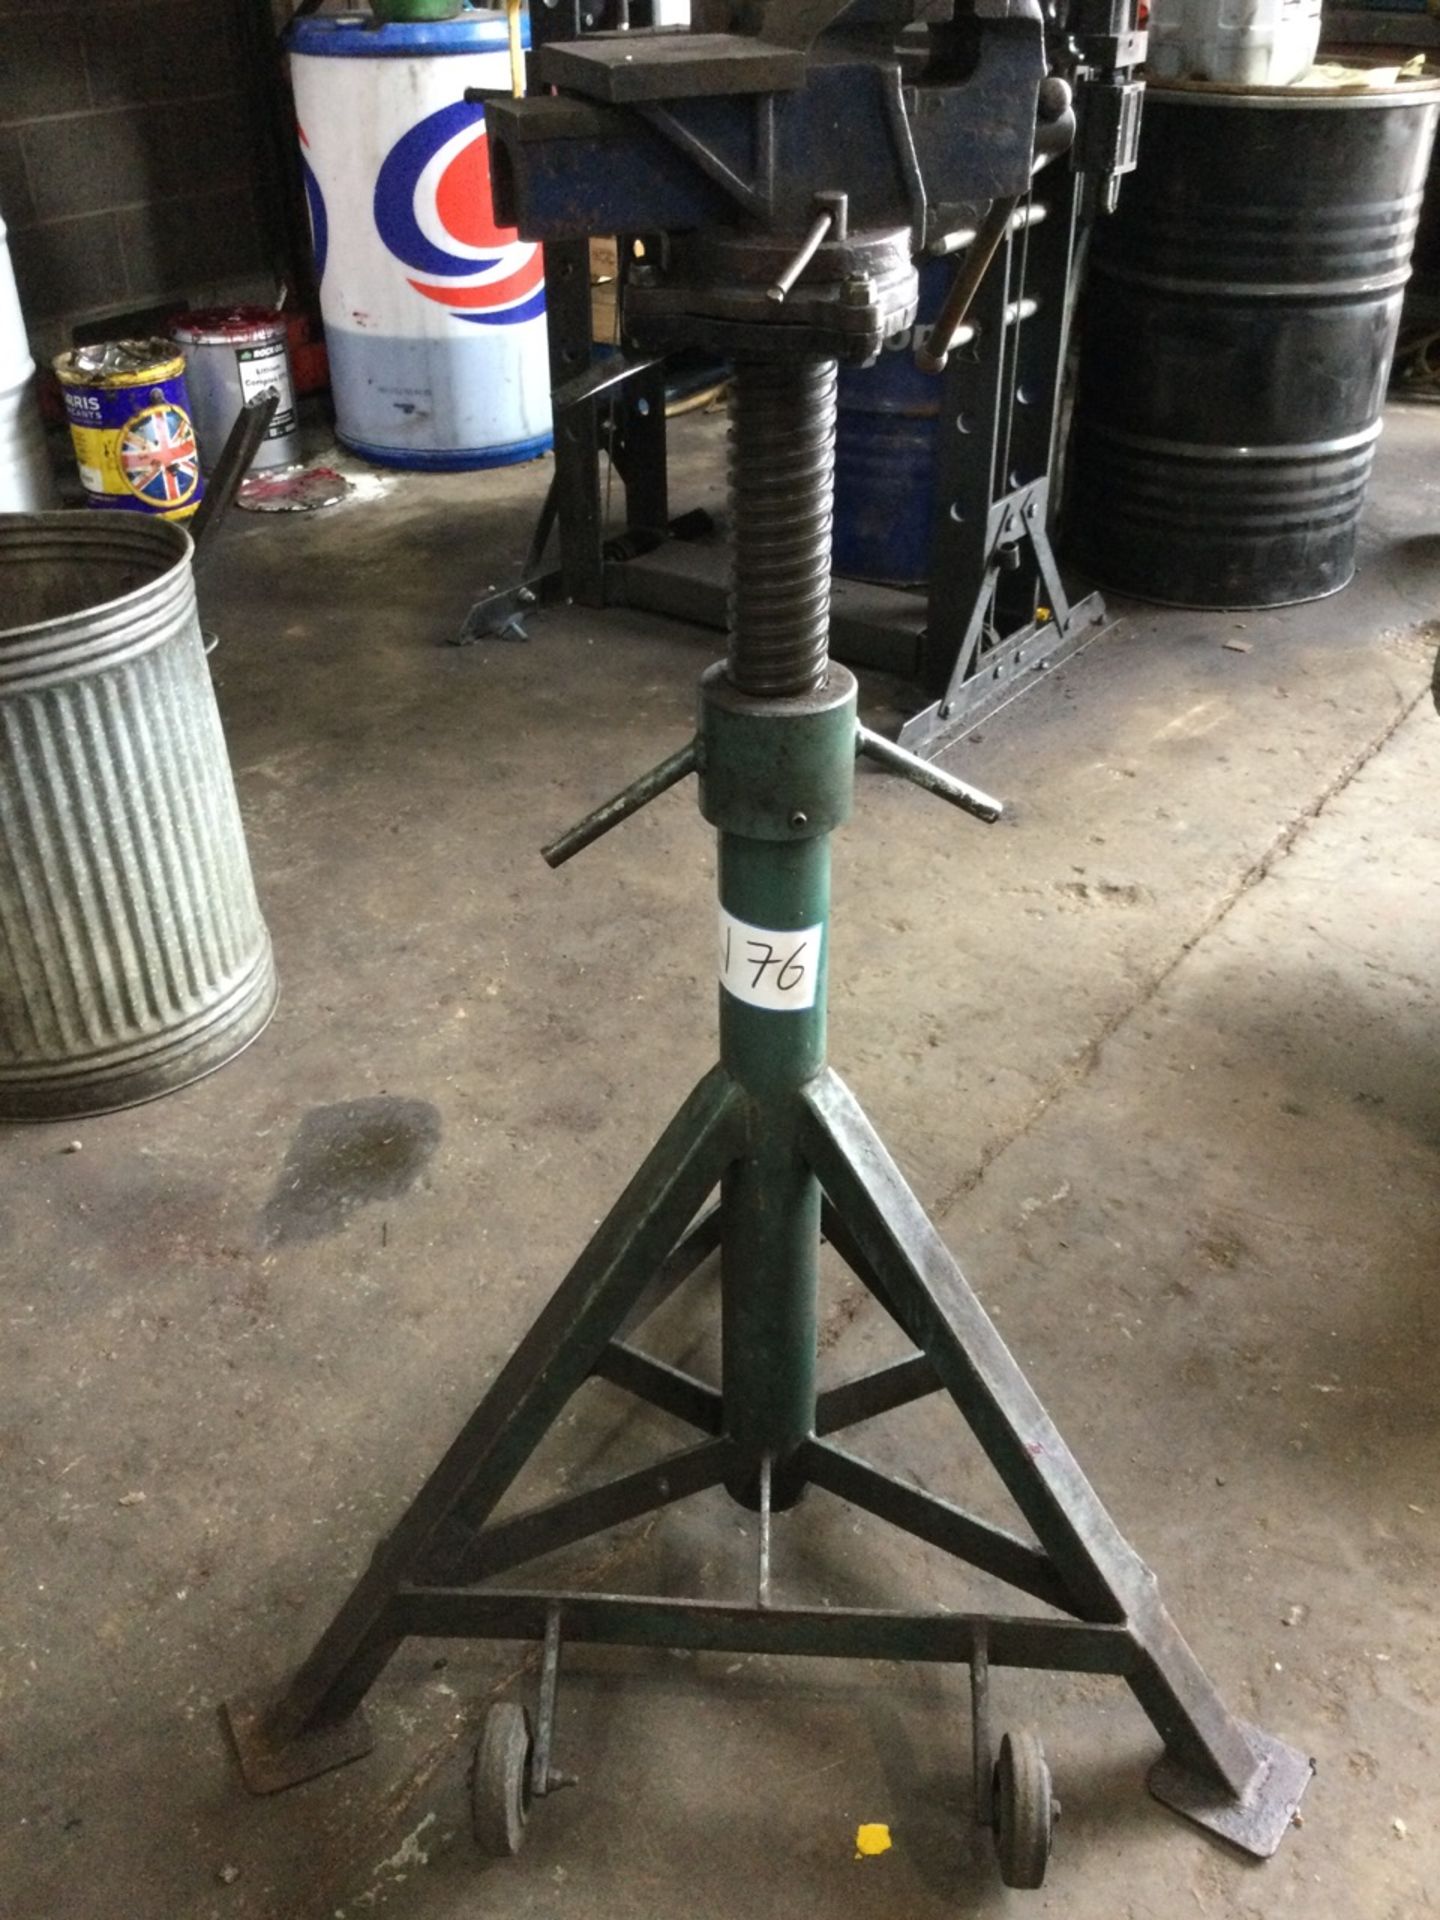 Unknown 4” Vice Mounted On An Adjustable Mobile Stand